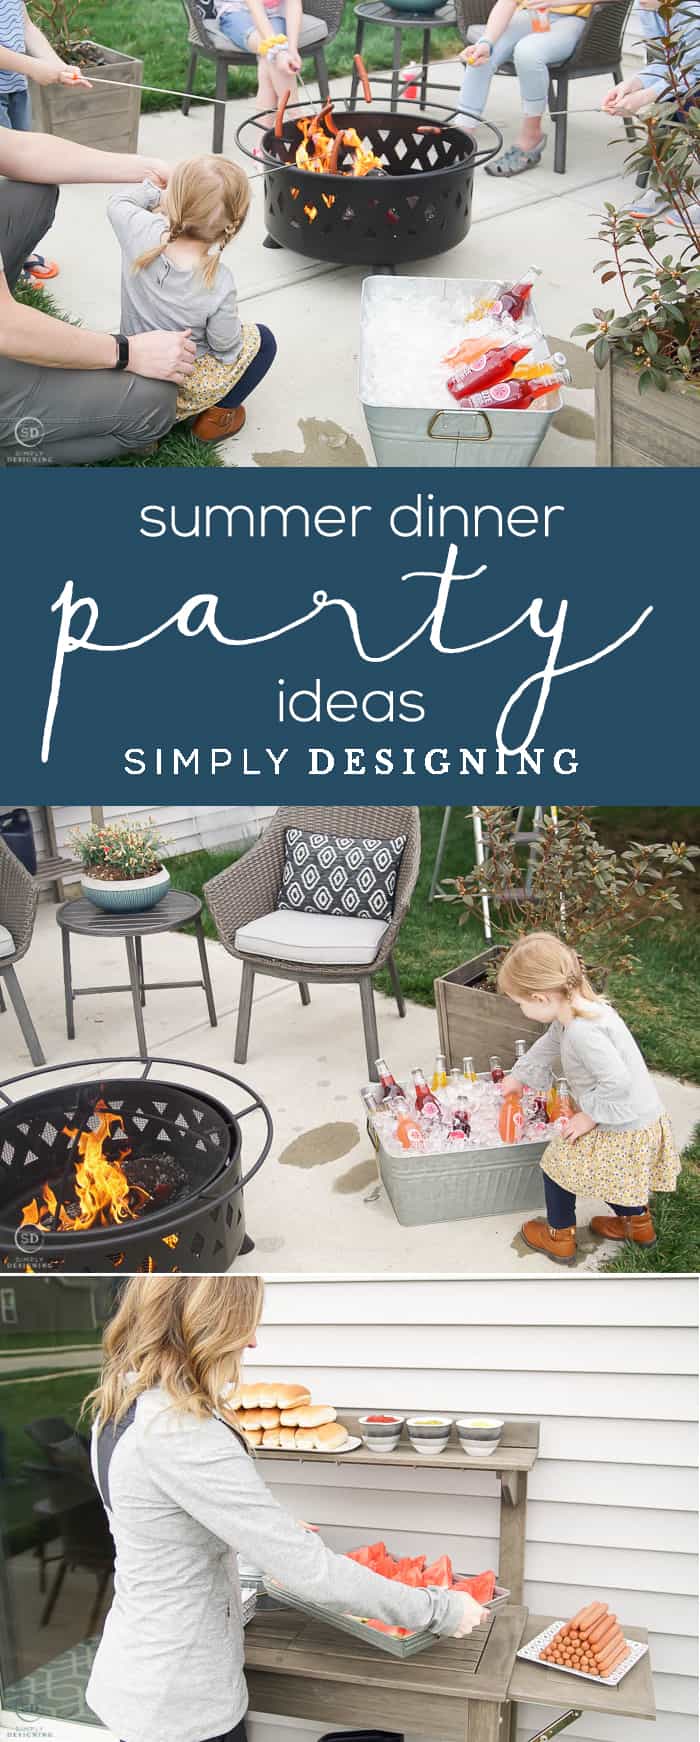 Summer Dinner Party Idea - these family friendly summer dinner party ideas are so fun and easy